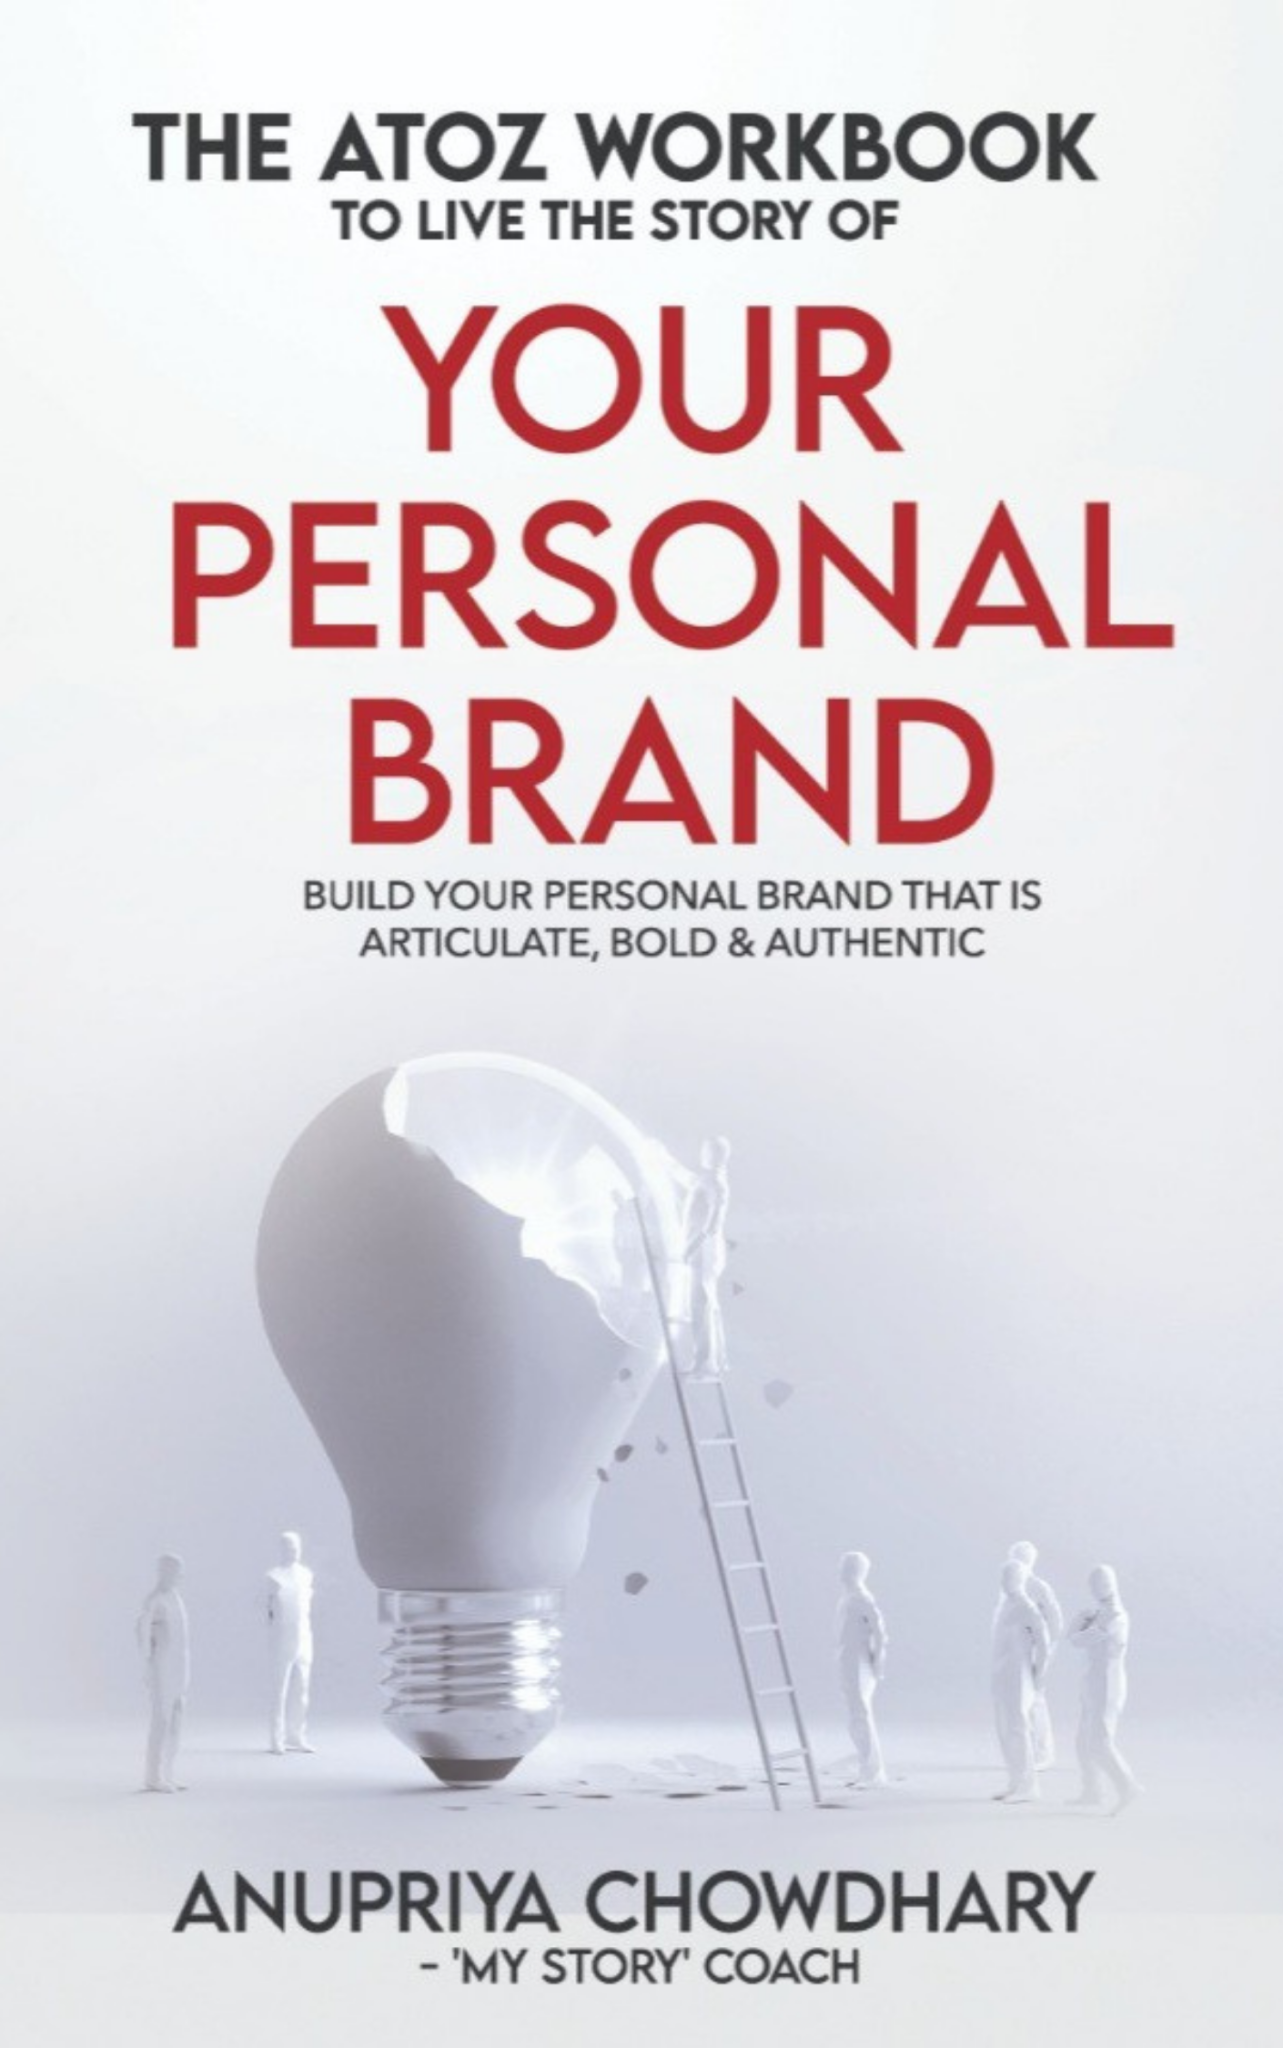 Personal Brand Personal Storytelling